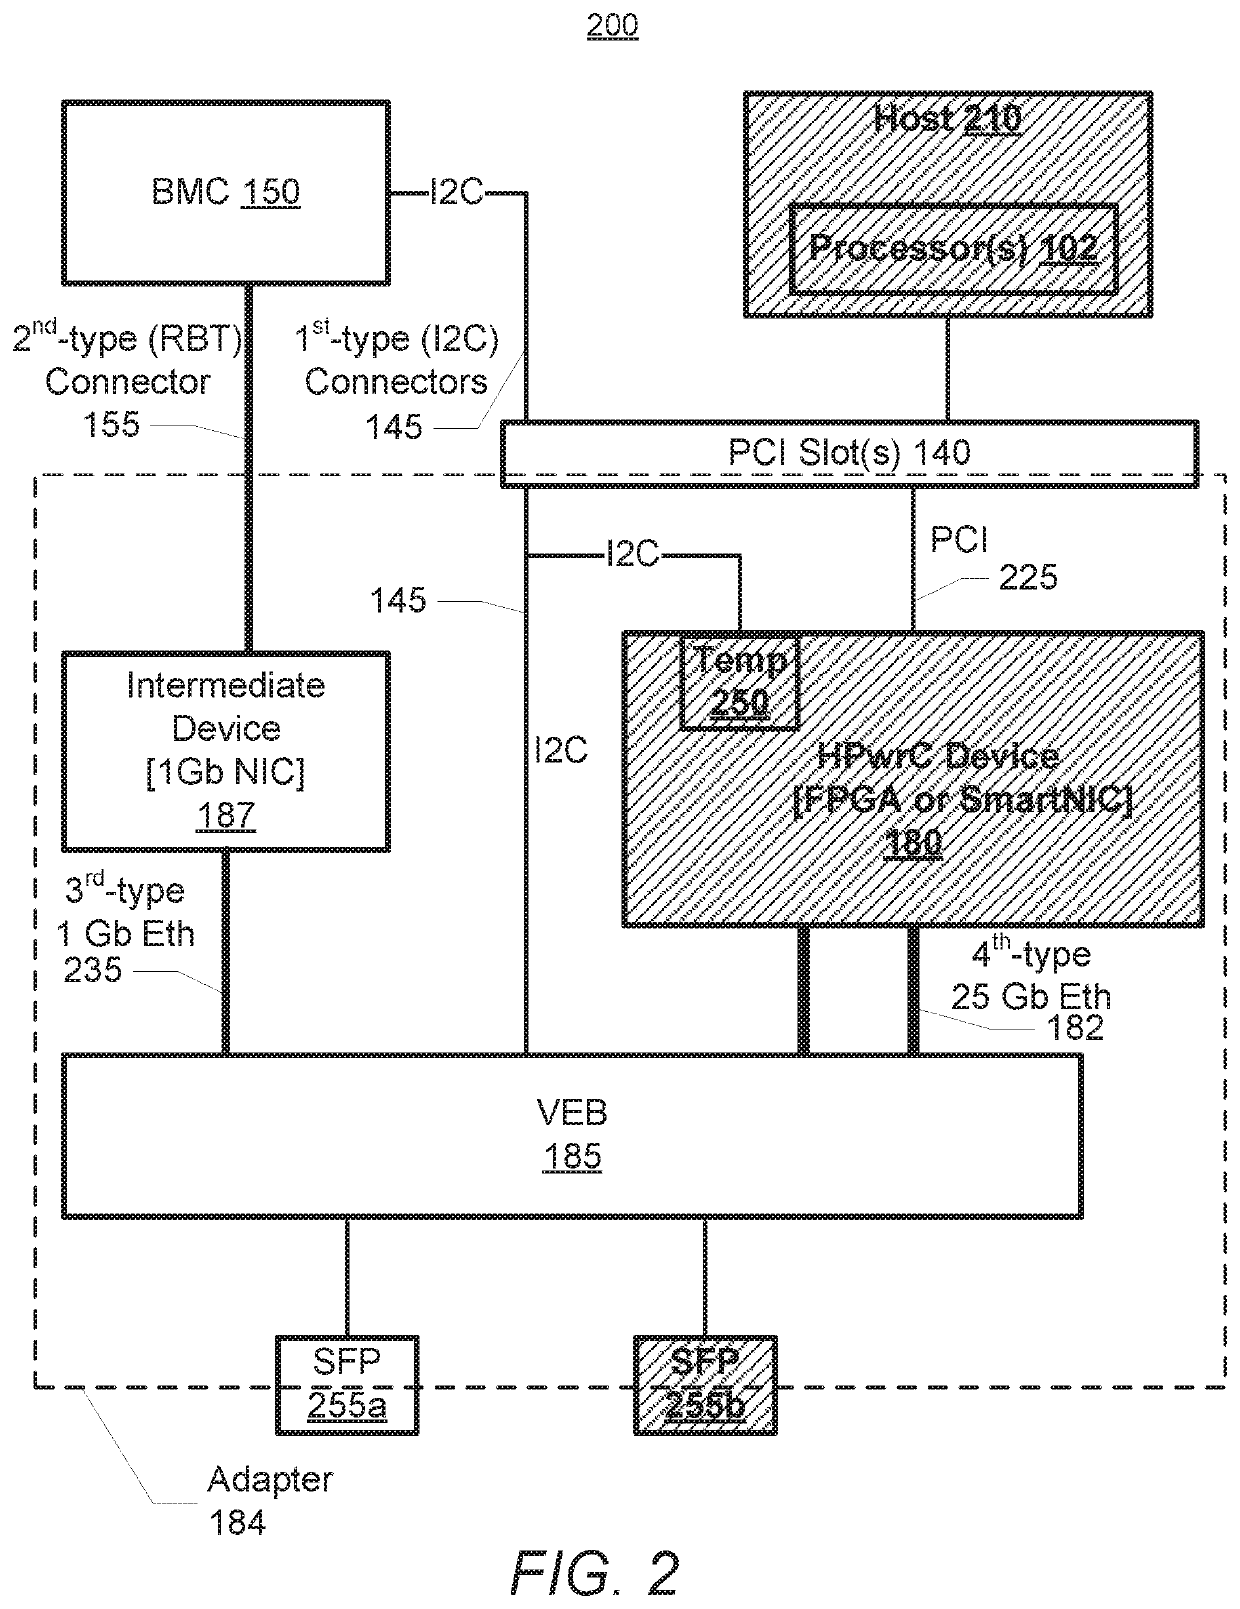 Adding network controller sideband interface (NC-SI) sideband and management to a high power consumption device